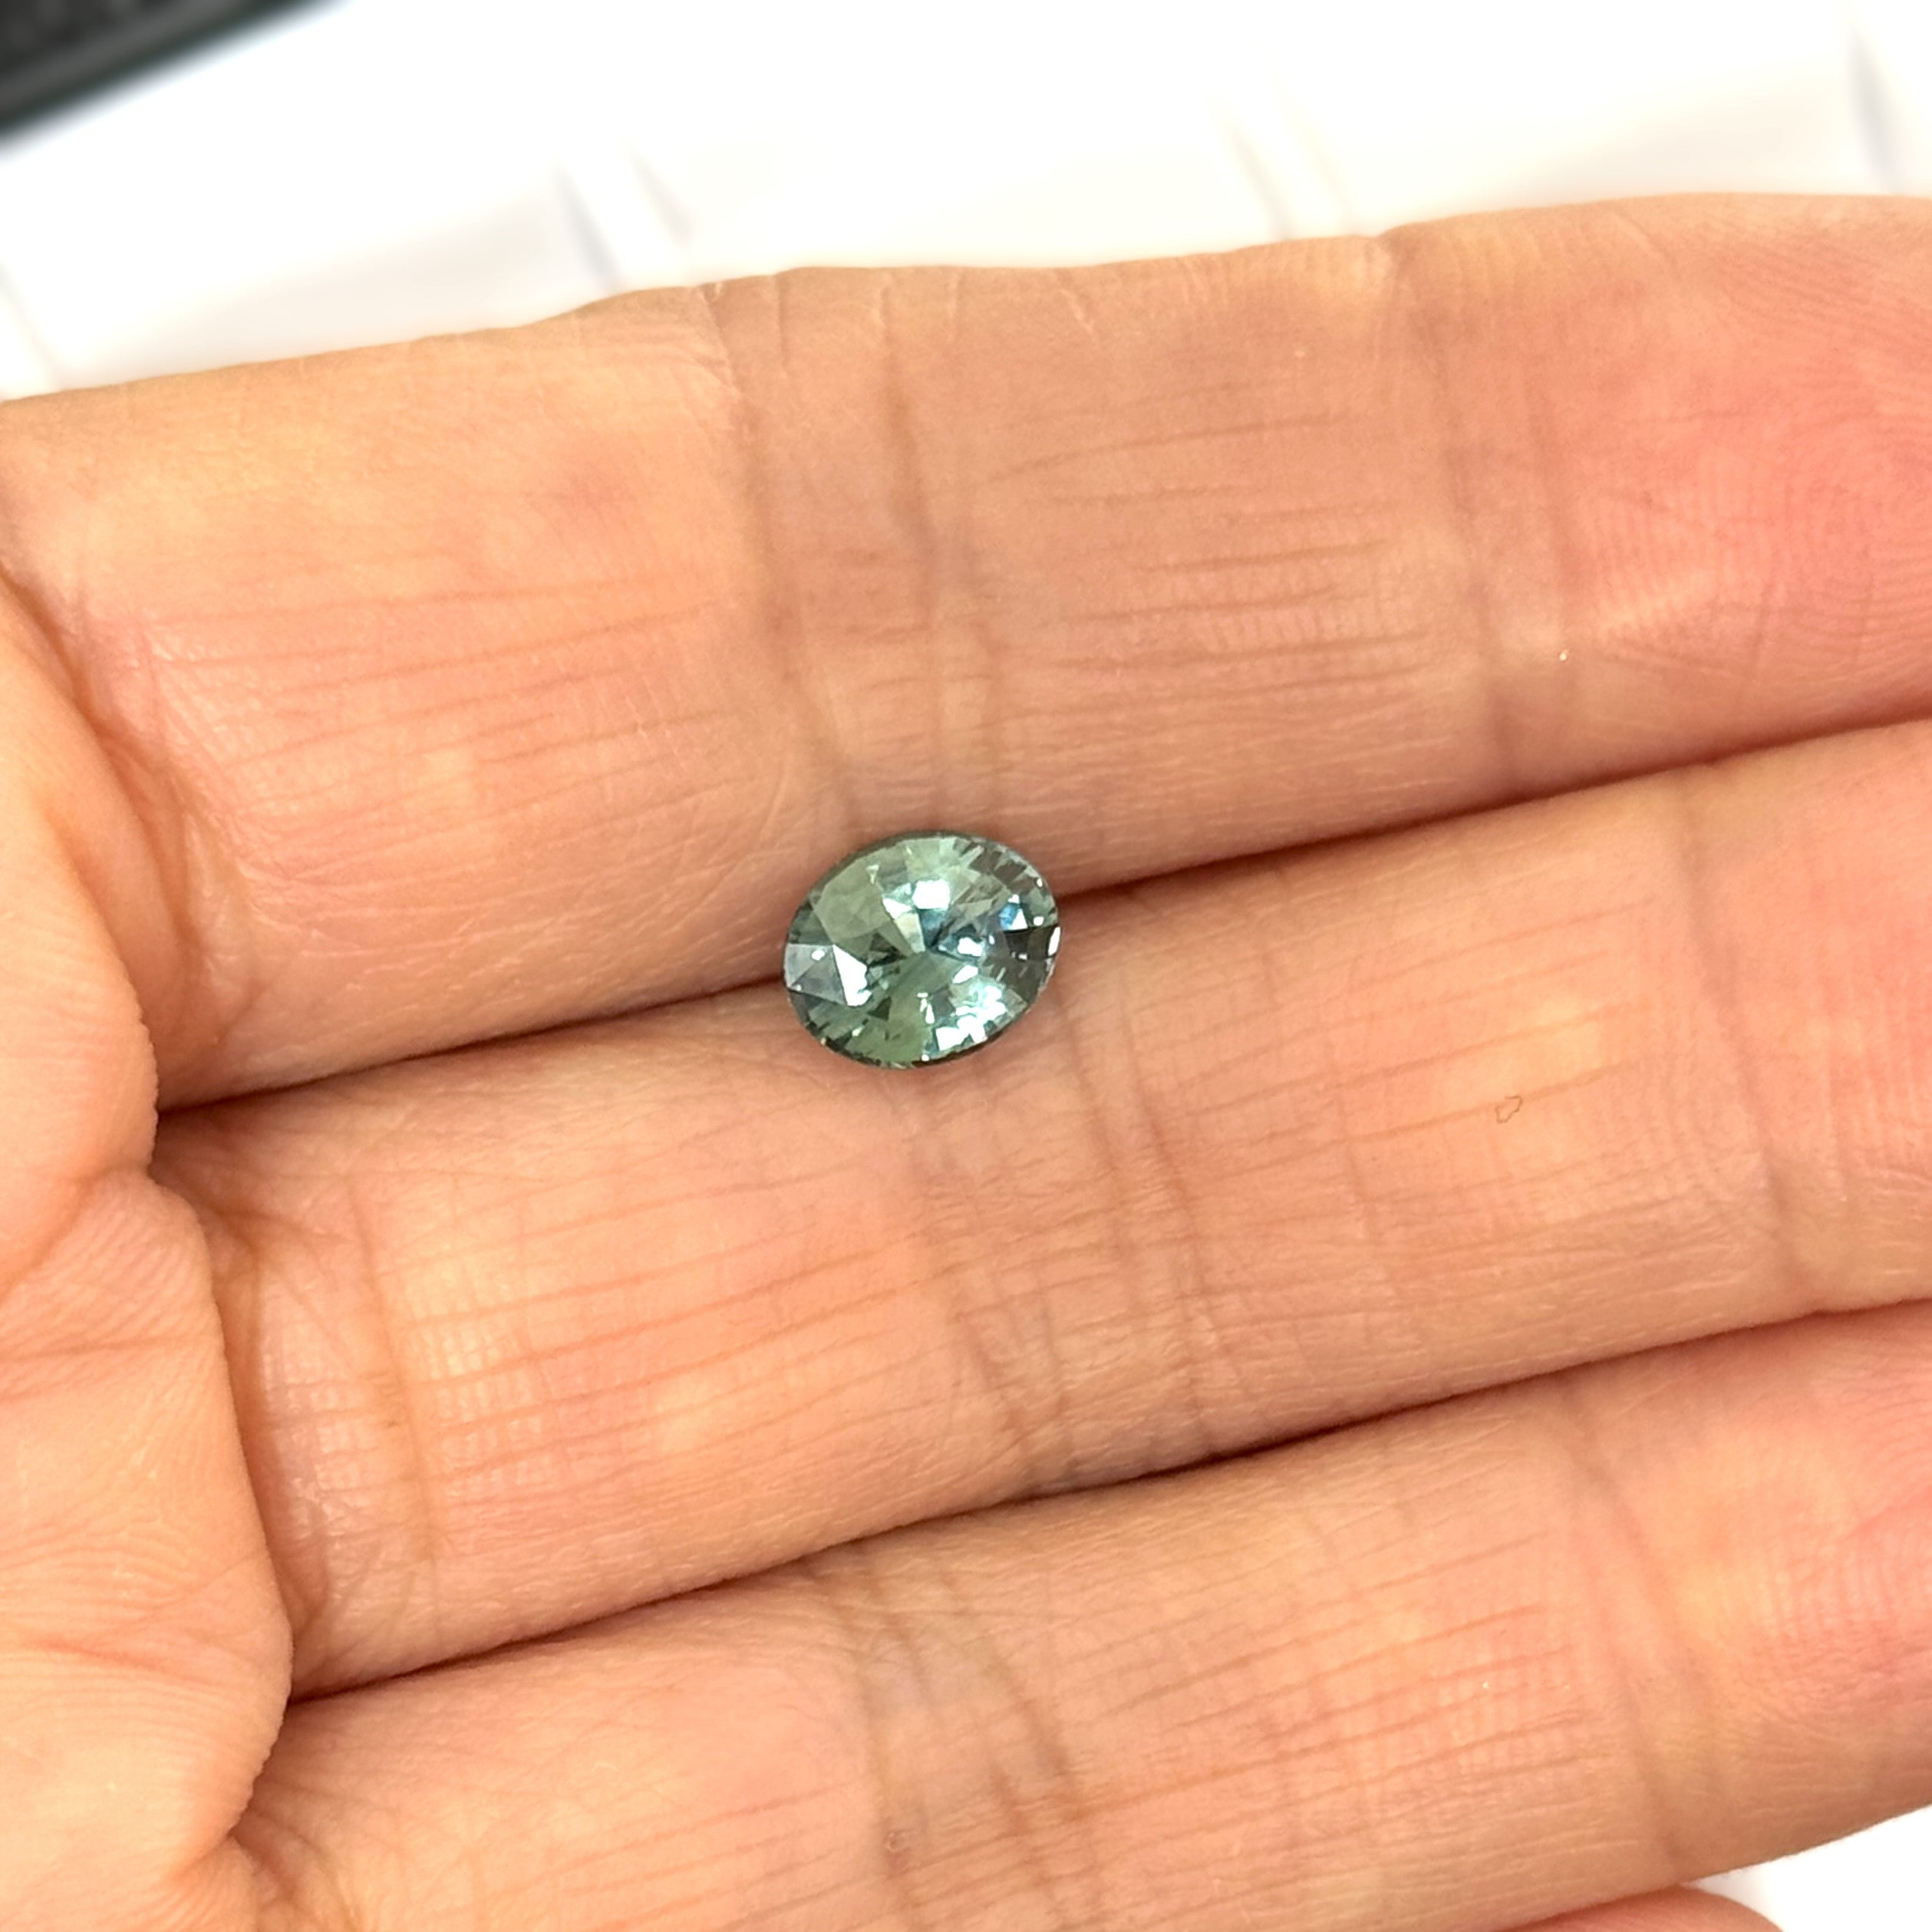 Green Sapphire 1.56ct Oval